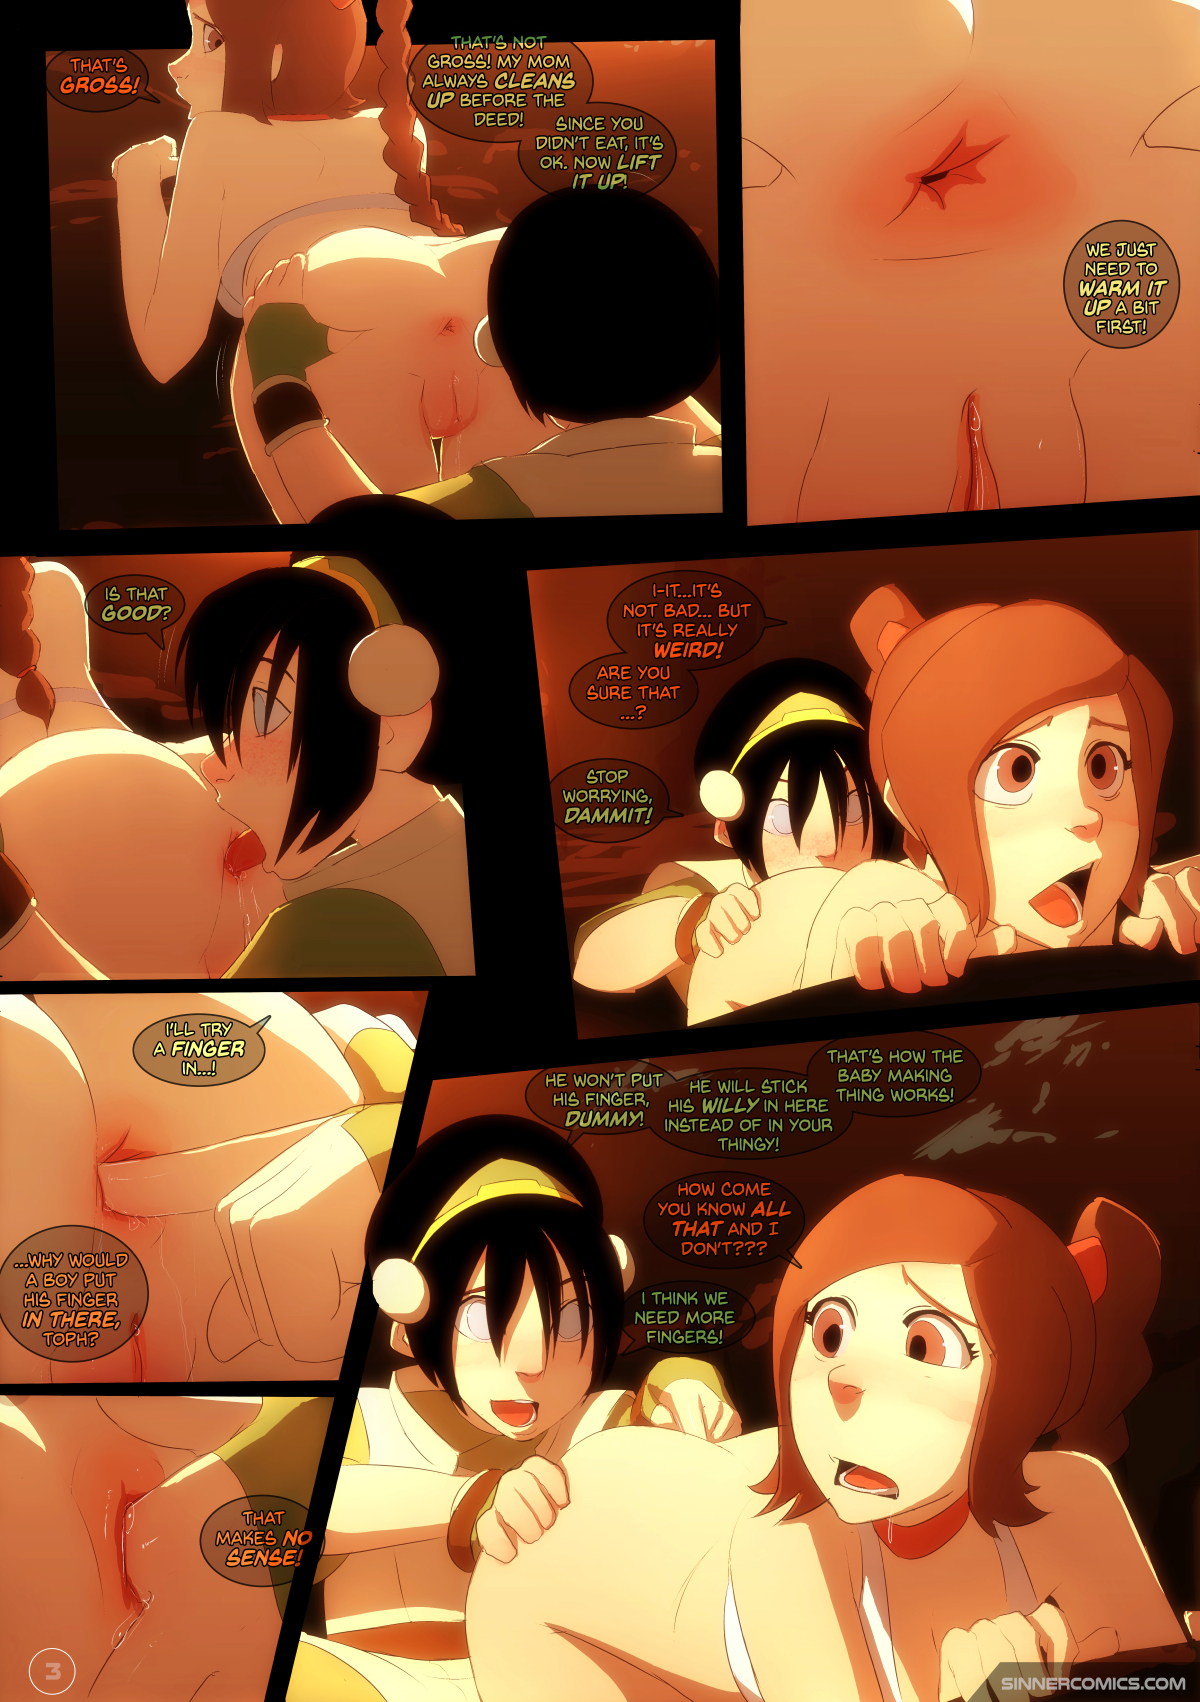 Updated new Sillygirl Toph vs Ty Lee Avatar The Last Airbender parody Porn Comic